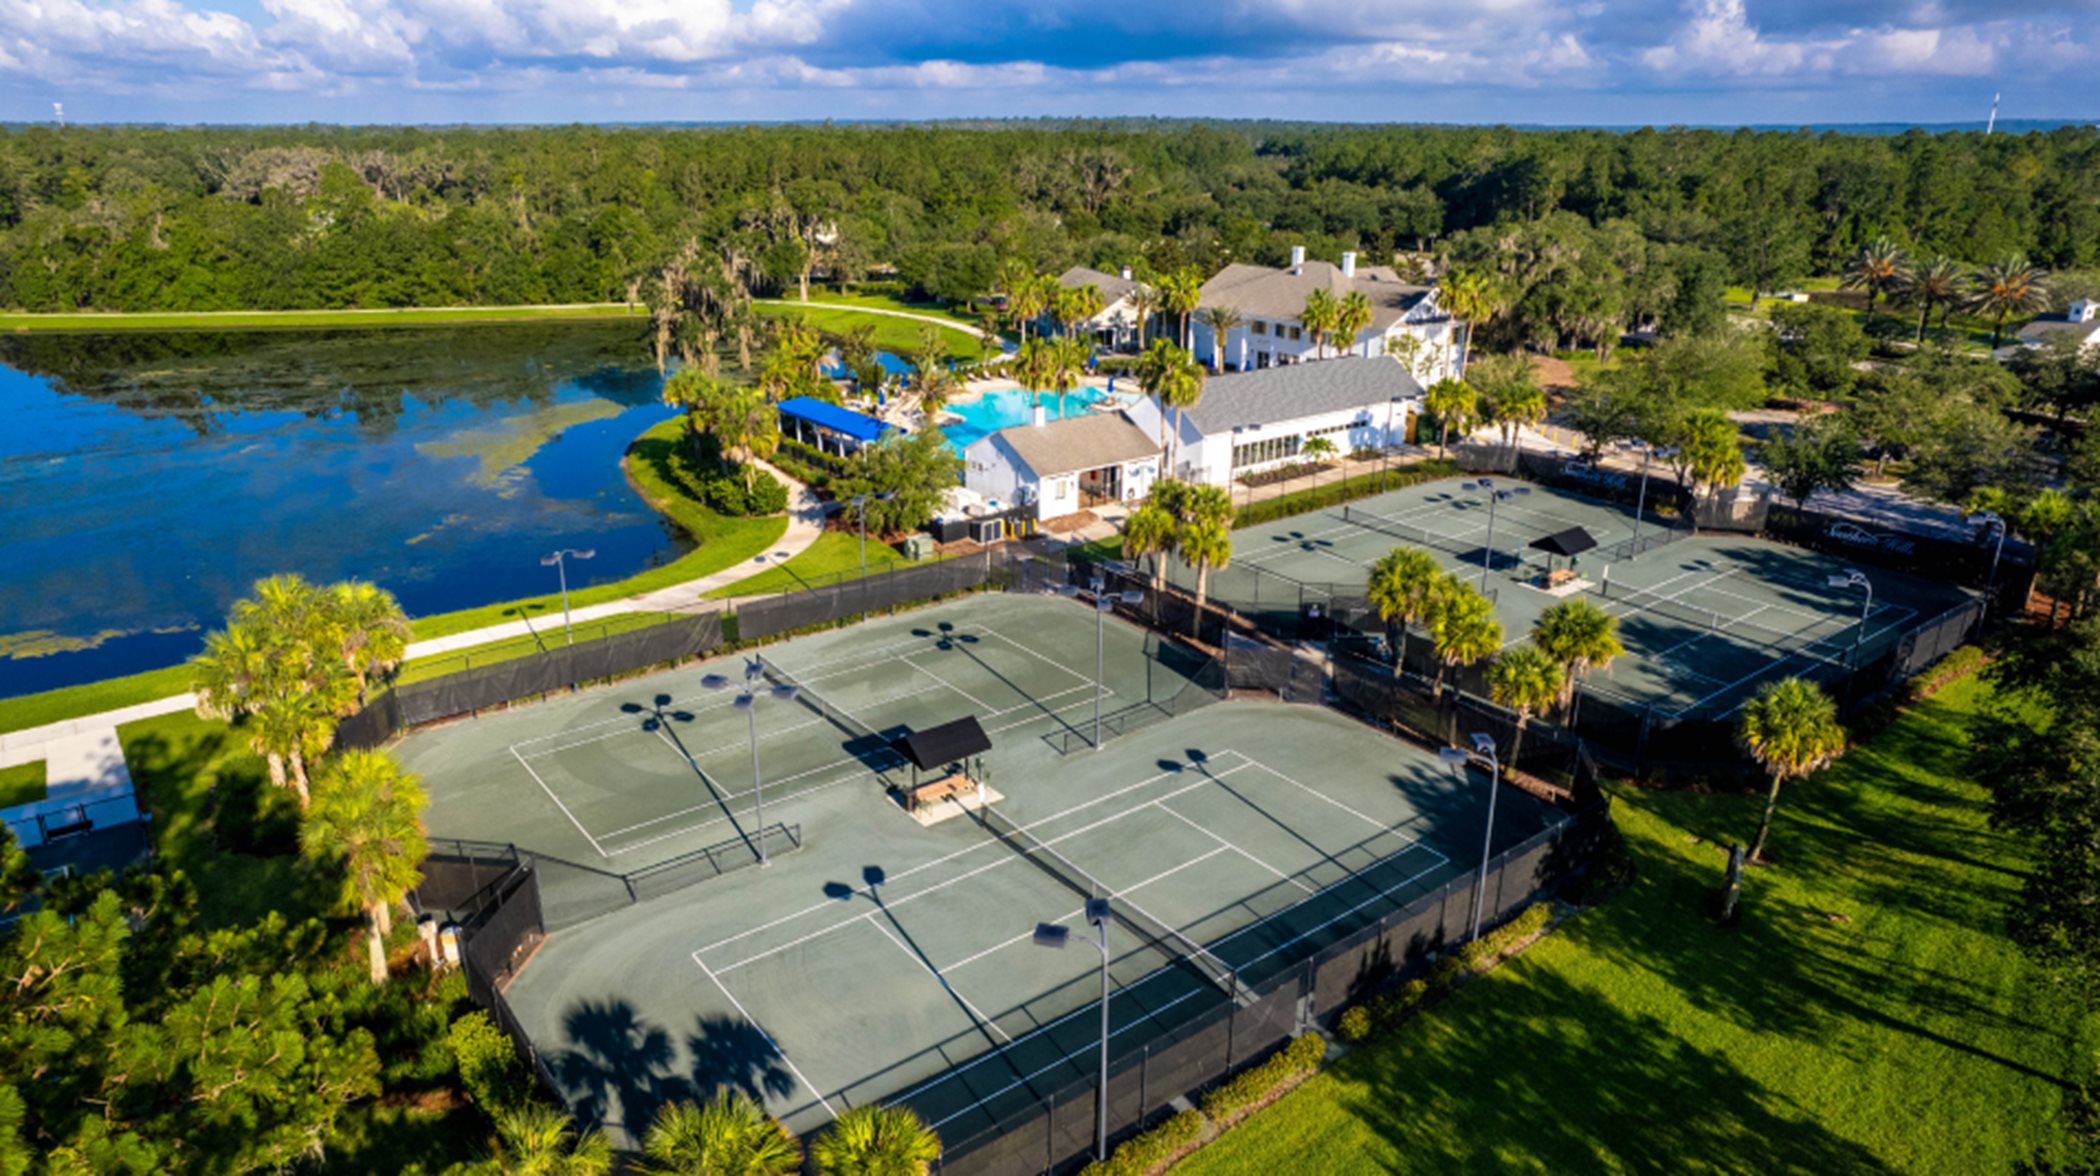 Southern hills tennis aerial view